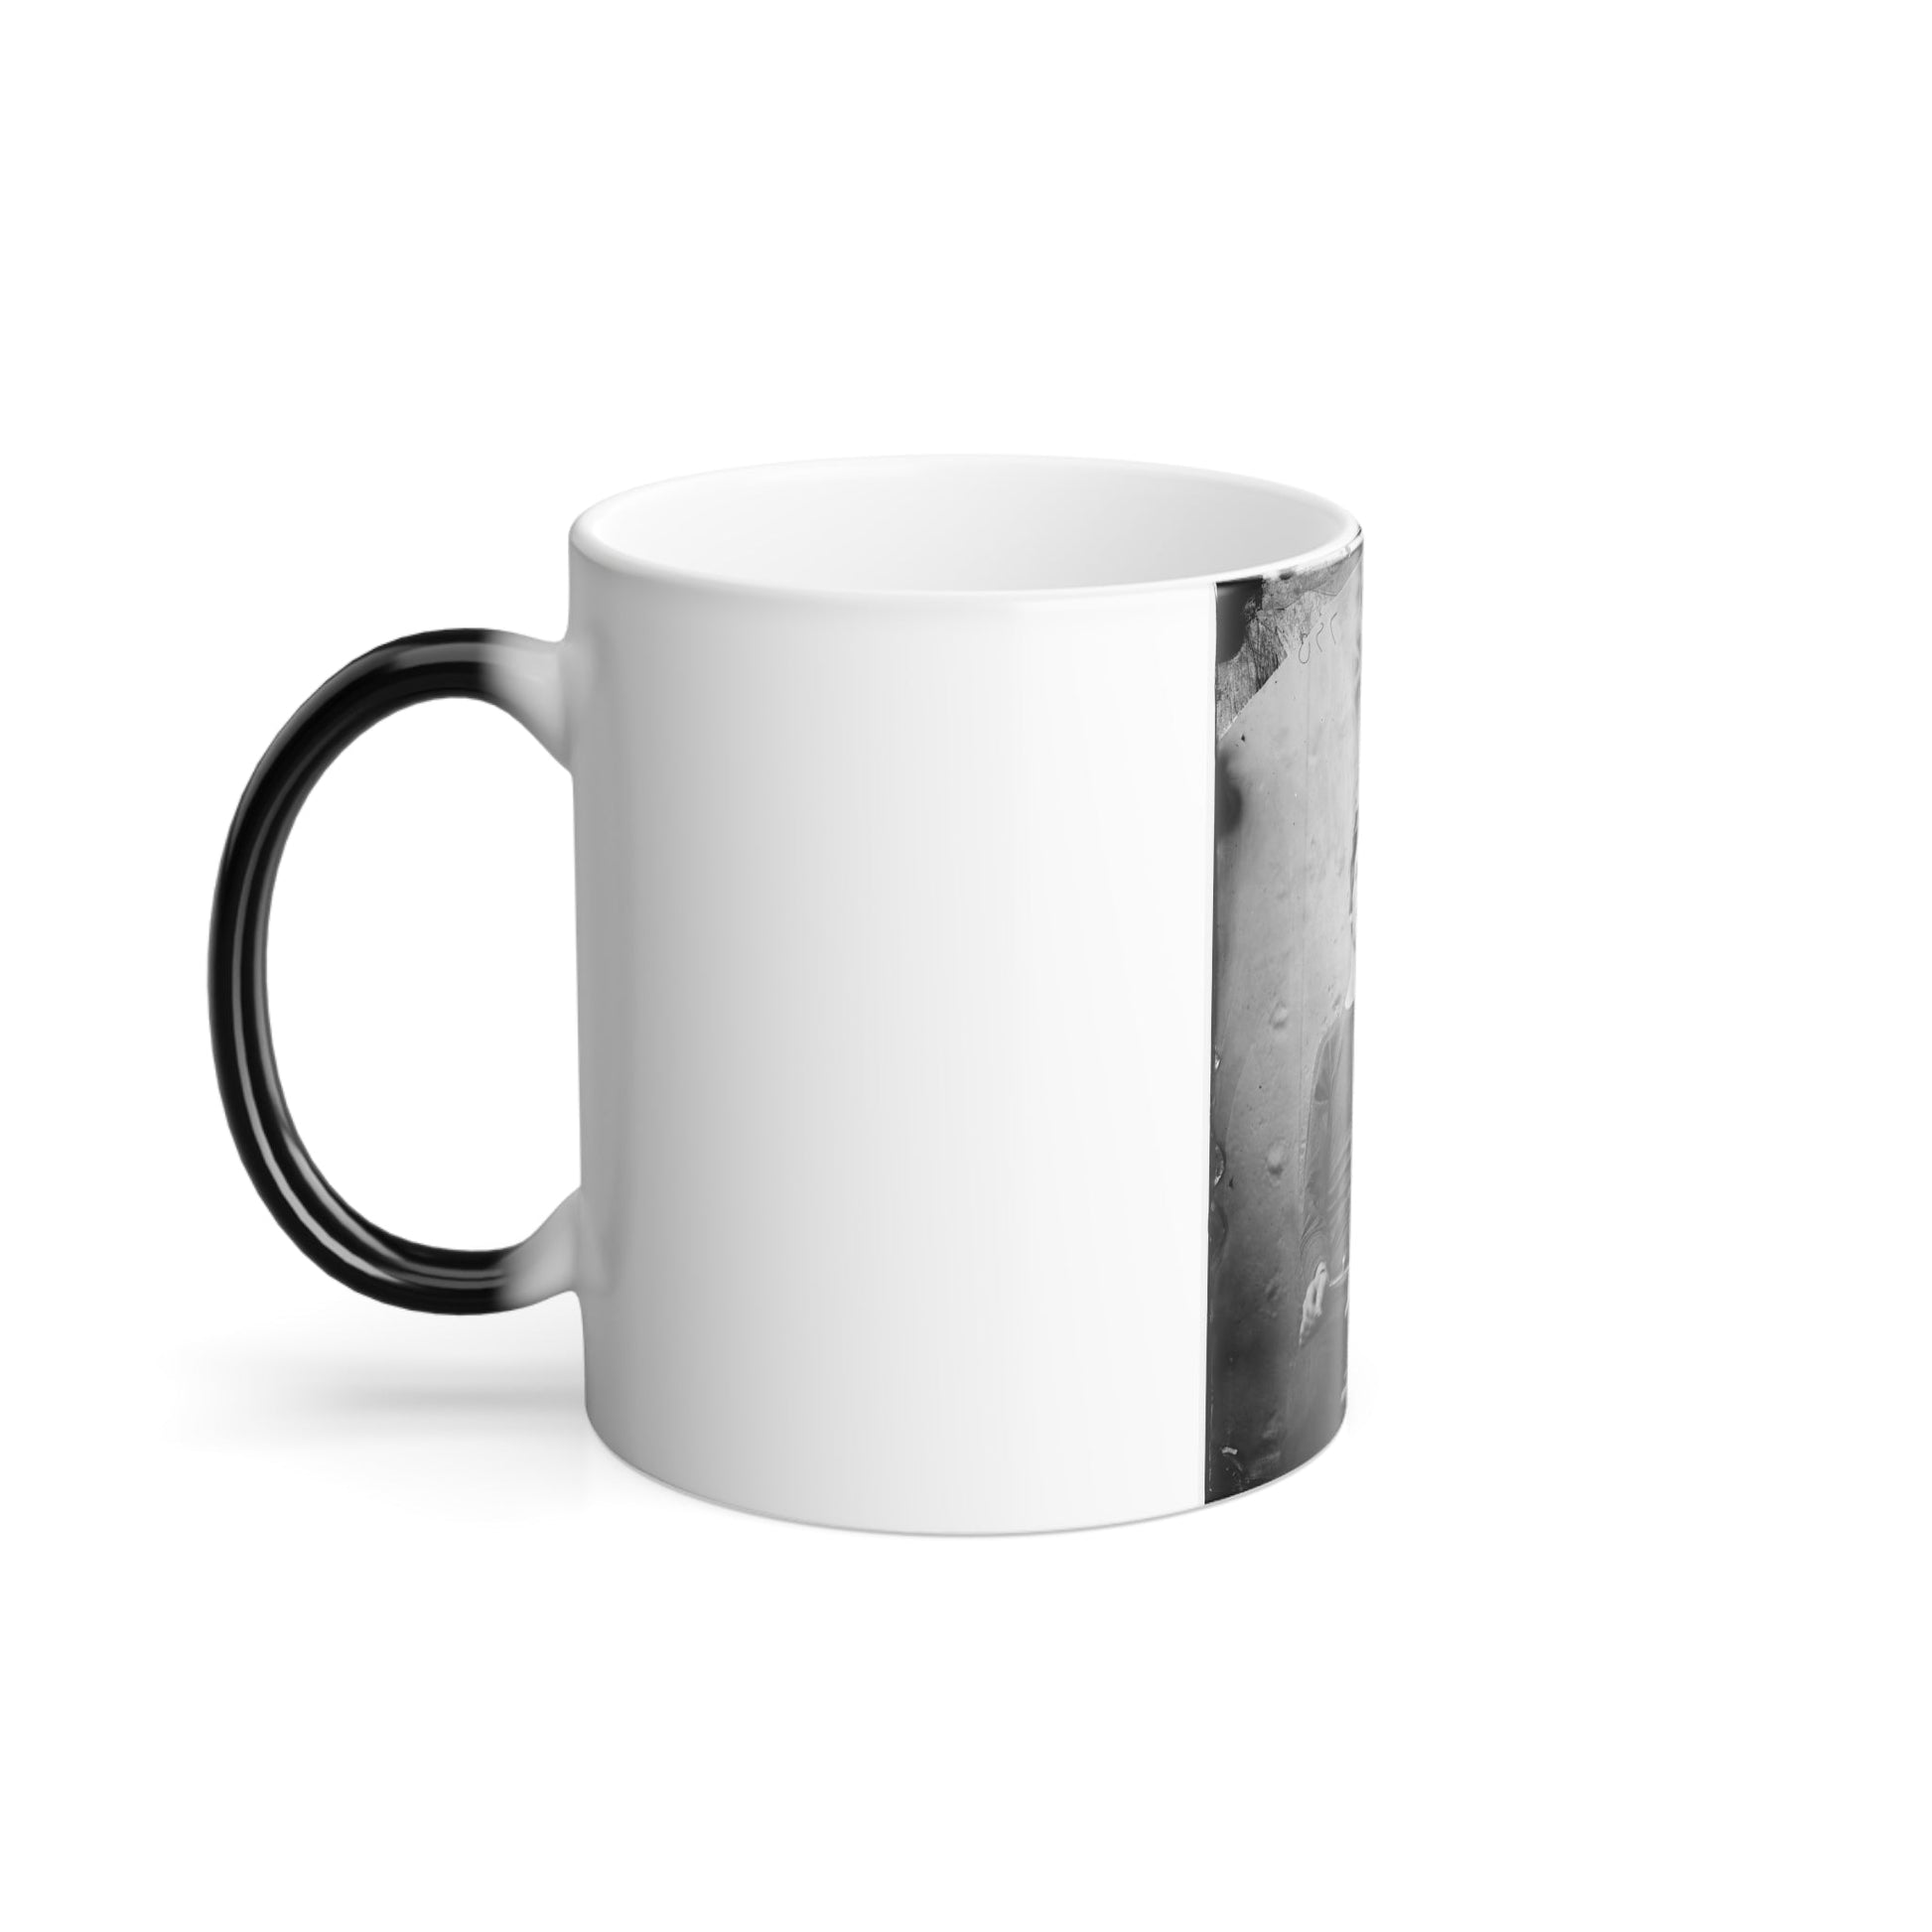 Washington Navy Yard, D.C. Lewis Payne, in Sweater, Seated and Manacled (U.S. Civil War) Color Morphing Mug 11oz-11oz-The Sticker Space